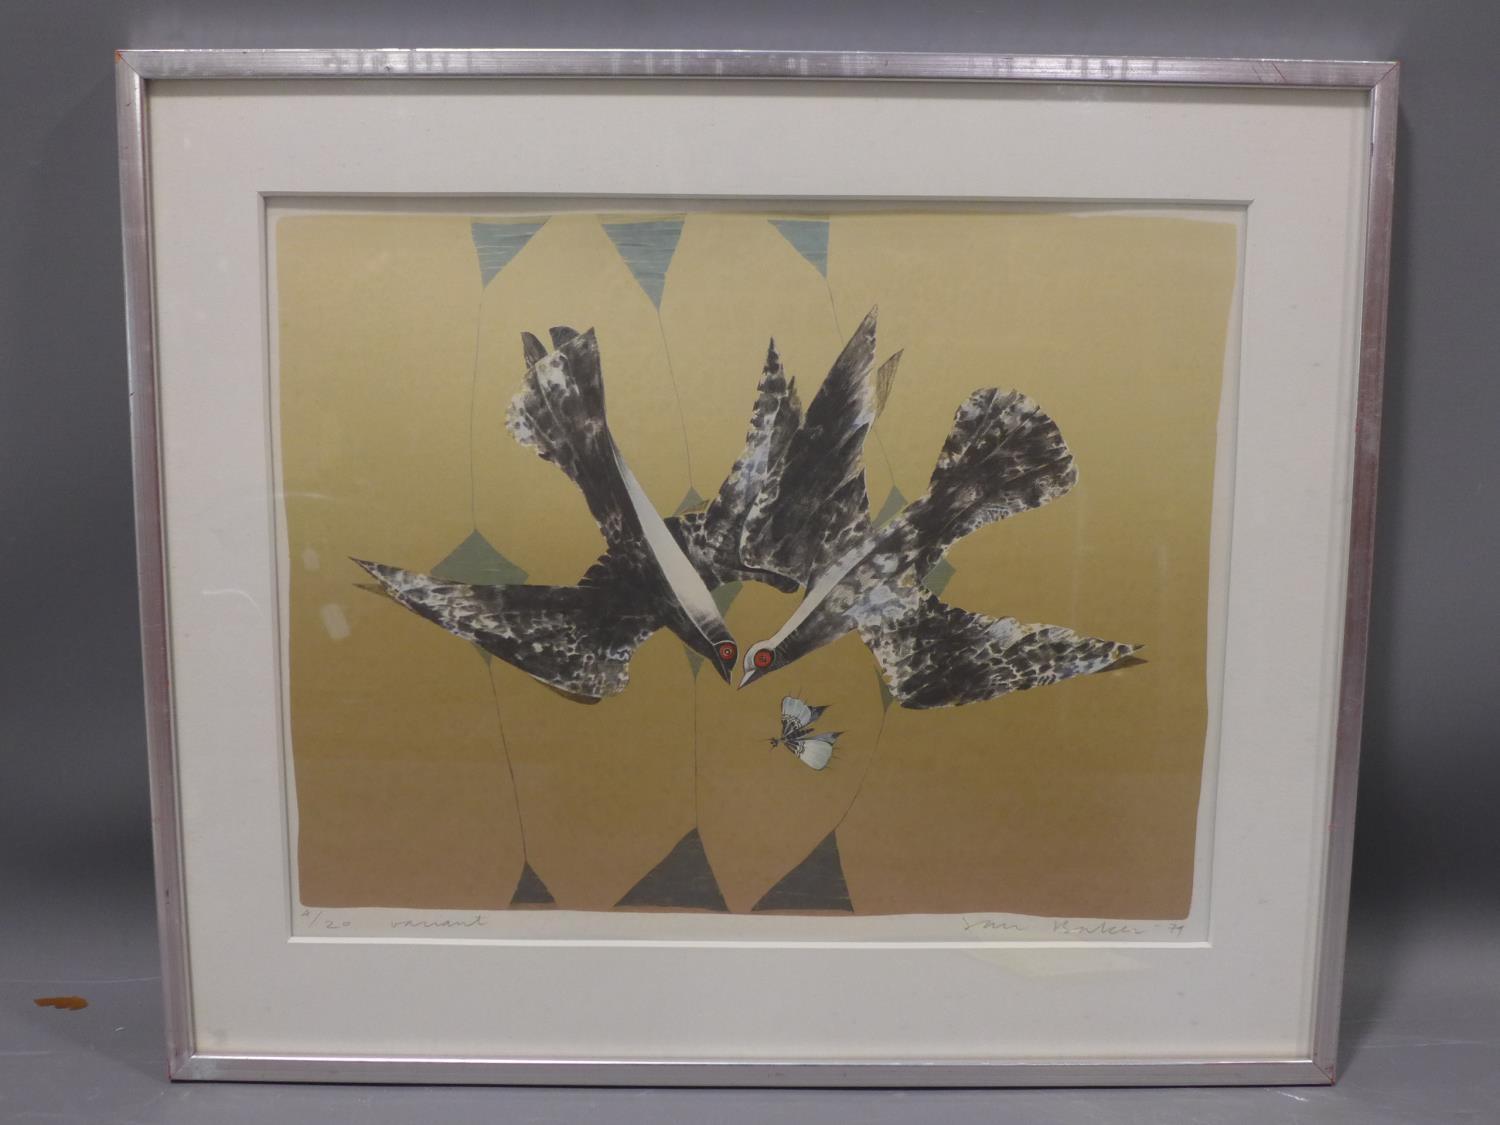 Jan Baker (Norwegian, born 1939), Two birds chasing a butterfly, lithgoraph, signed and dated 79 - Image 2 of 4